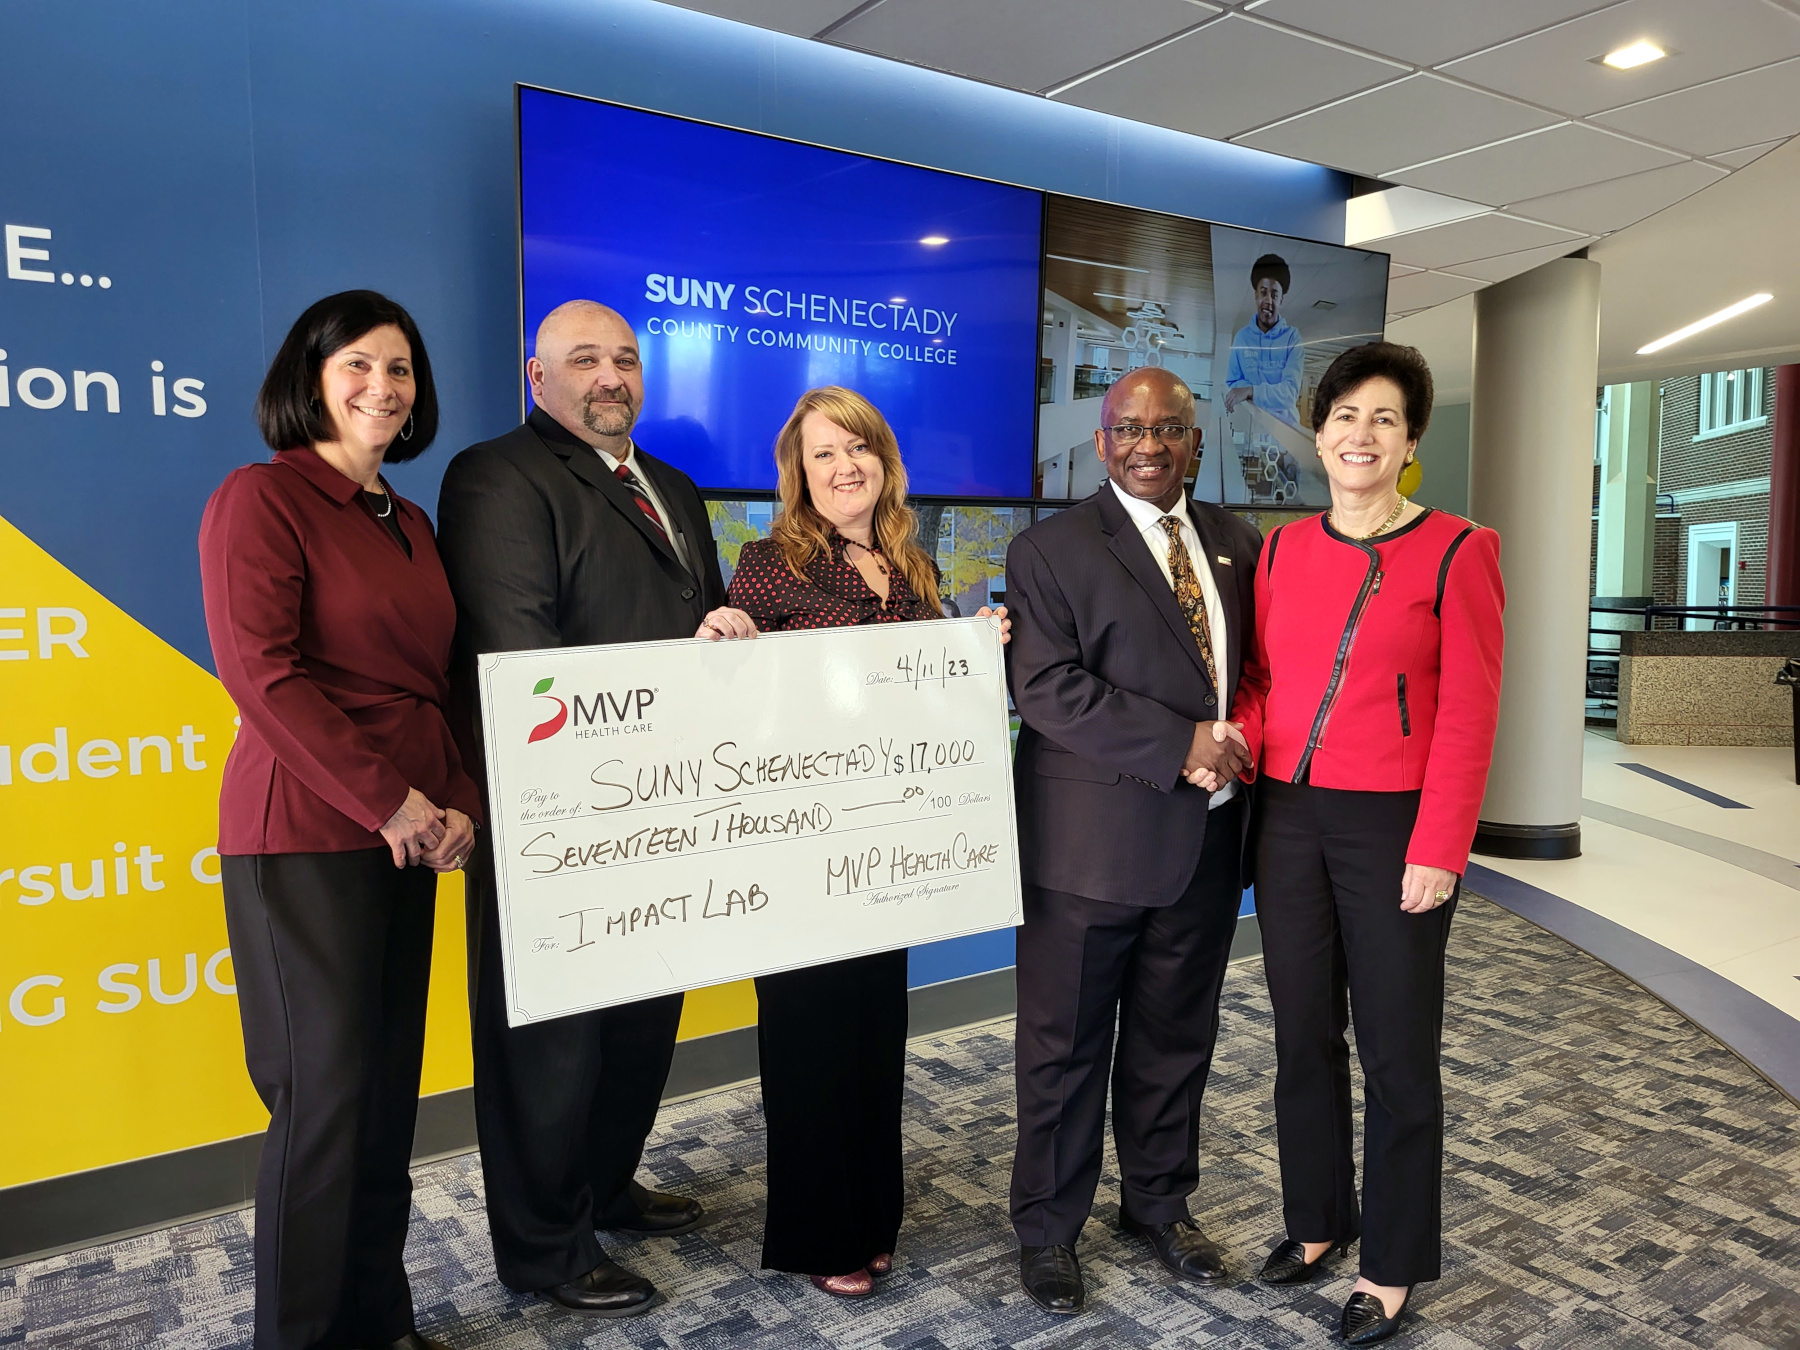 College officials and MVP officials with large check for MVP Healthcare Impact Lab